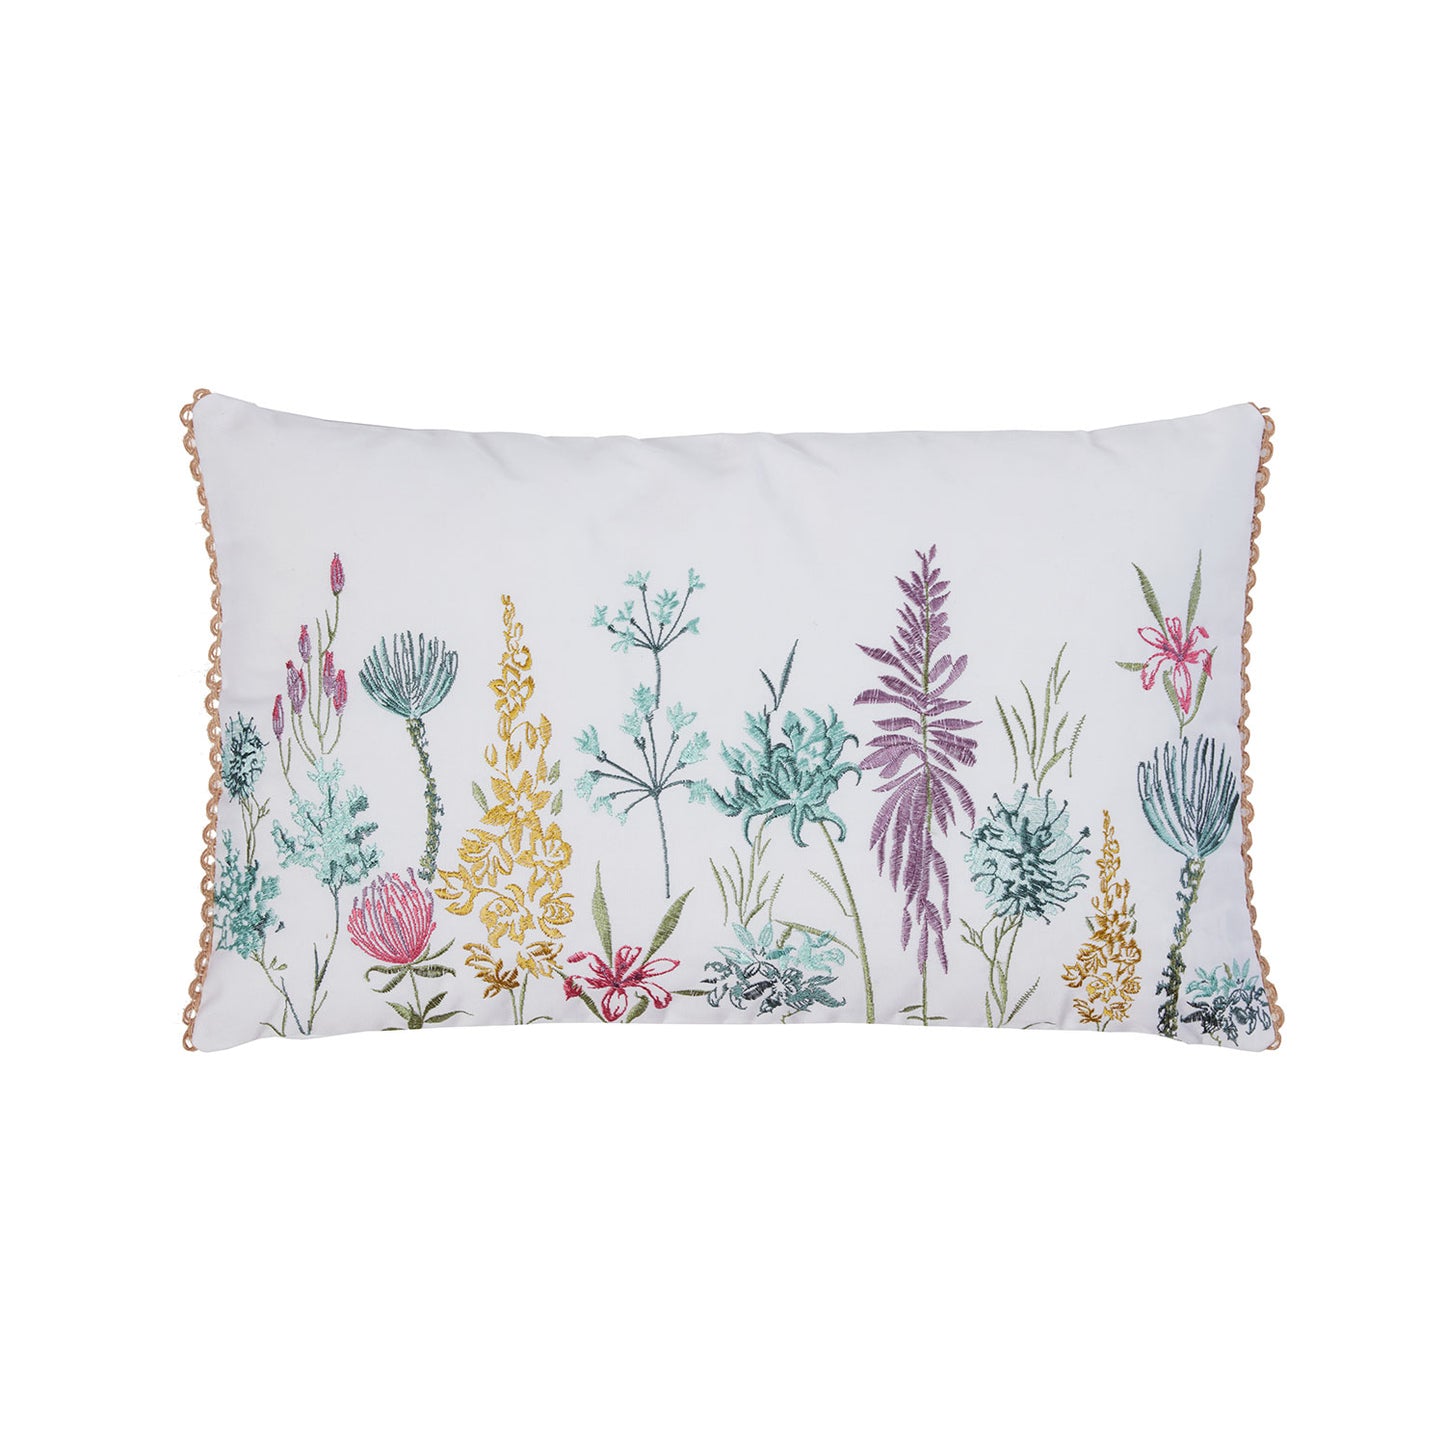 Lily Embroidered Wildflower Cushion (30cm x 50cm)